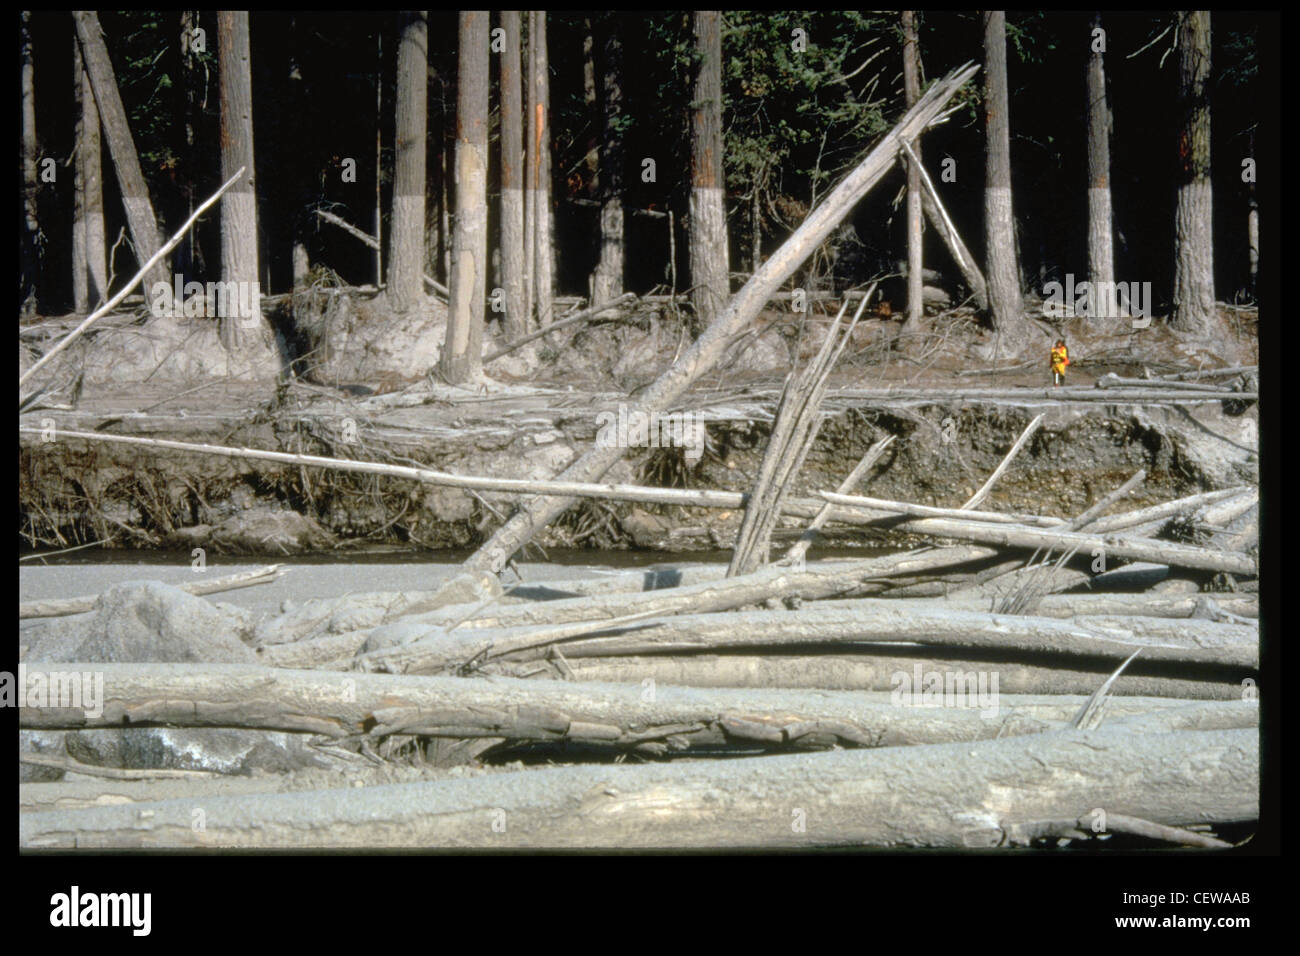 Nearly 135 miles (220 kilometers) of river channels surrounding the volcano were affected by the lahars of May 18, 1980. A mudline left behind on trees shows depths reached by the mud. A scientist (middle right) gives scale. This view is along the Muddy River, southeast of Mount St. Helens. Stock Photo